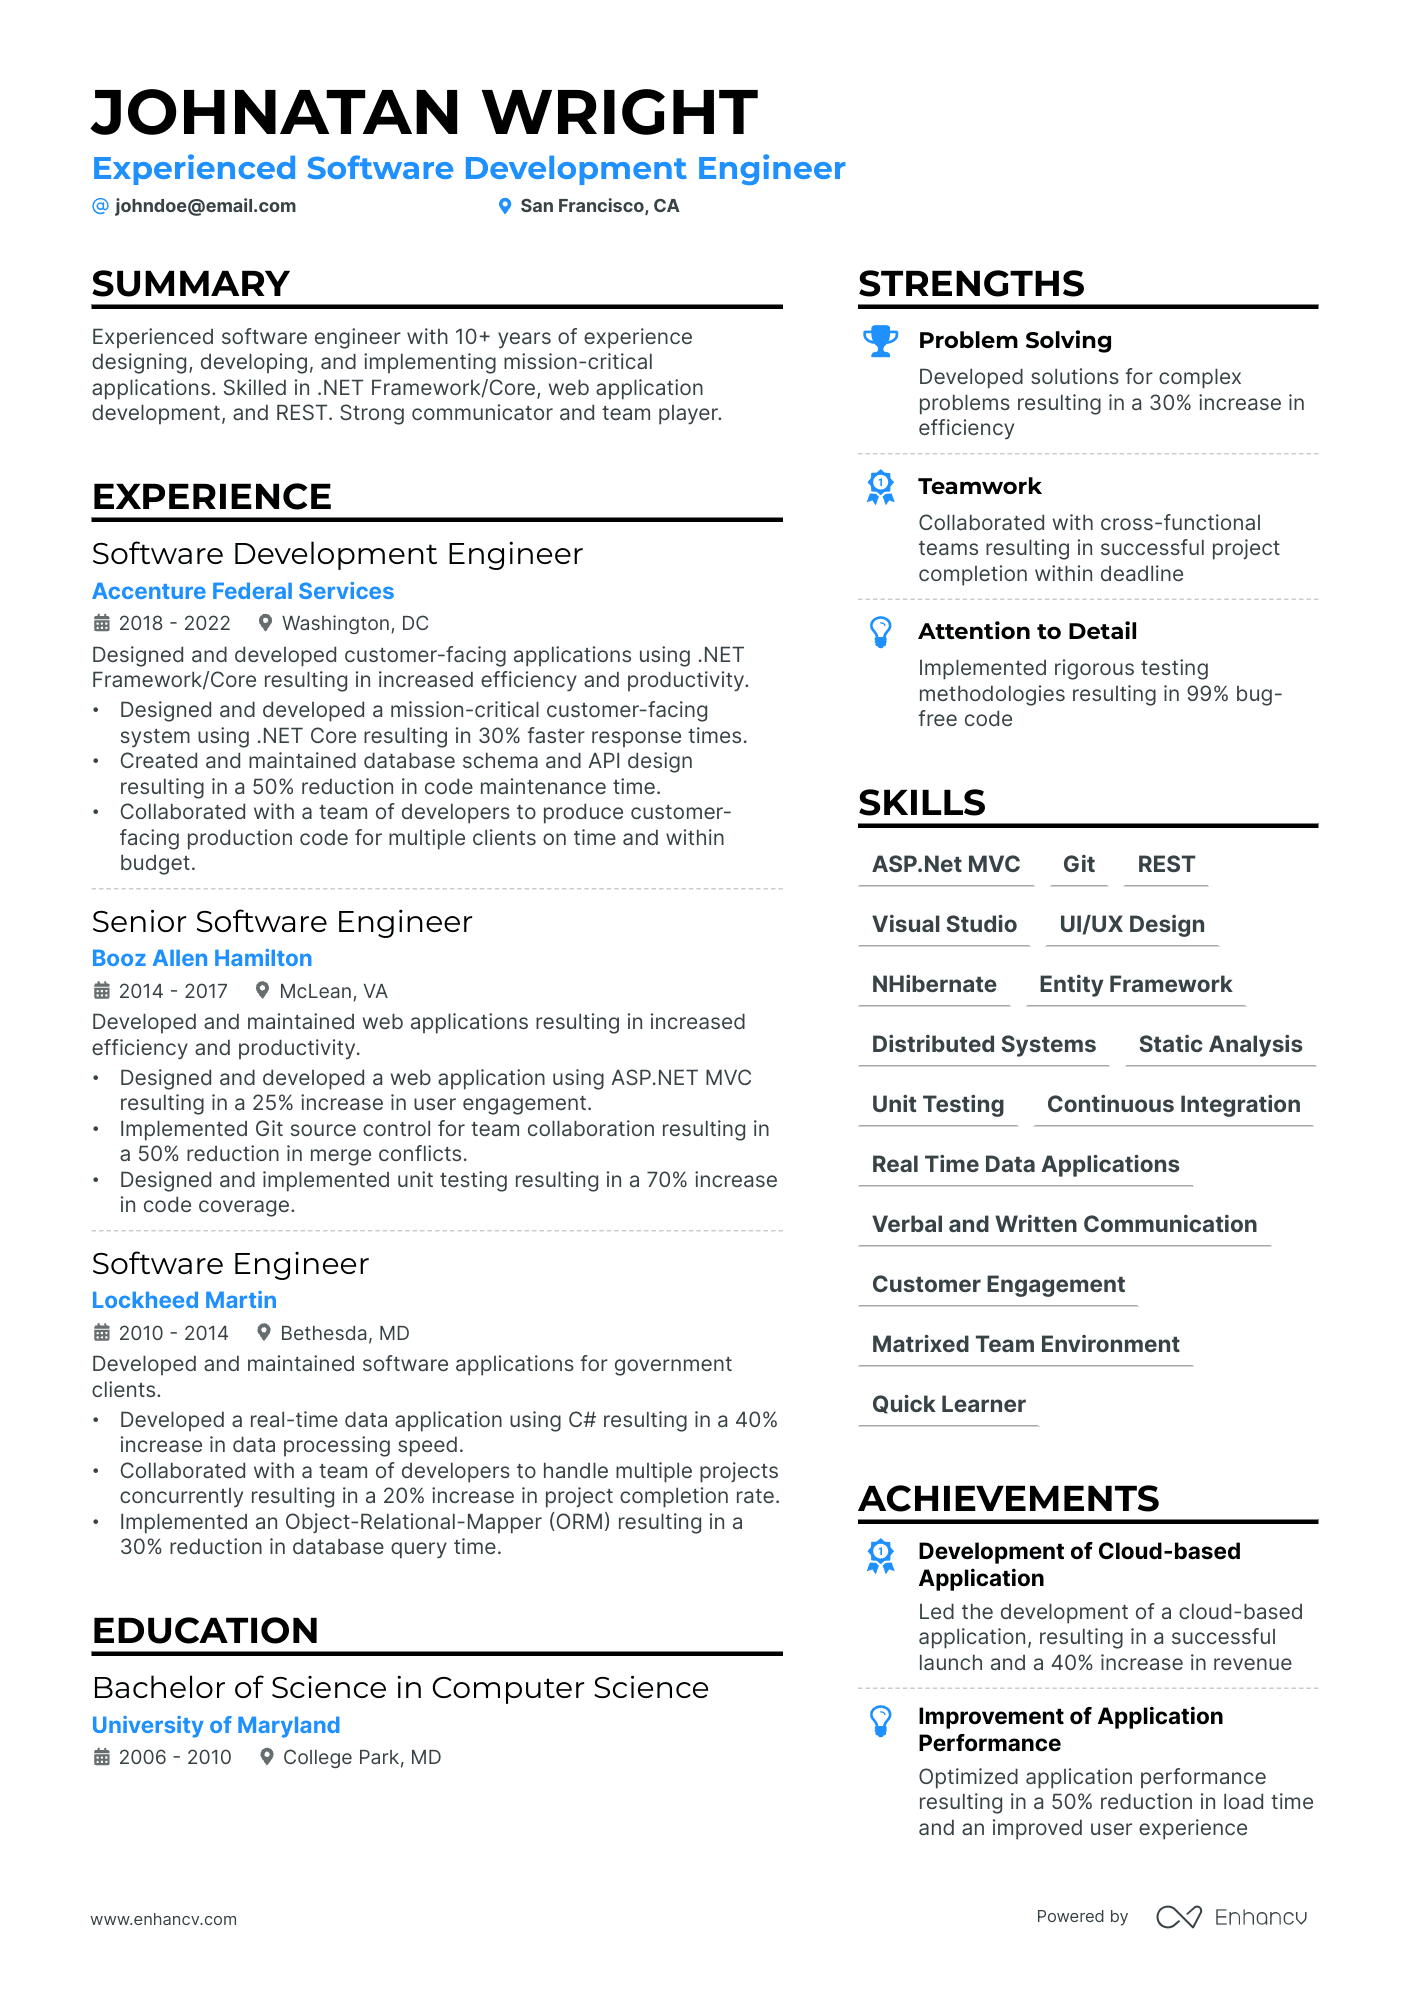 how to write experience in resume for software developer